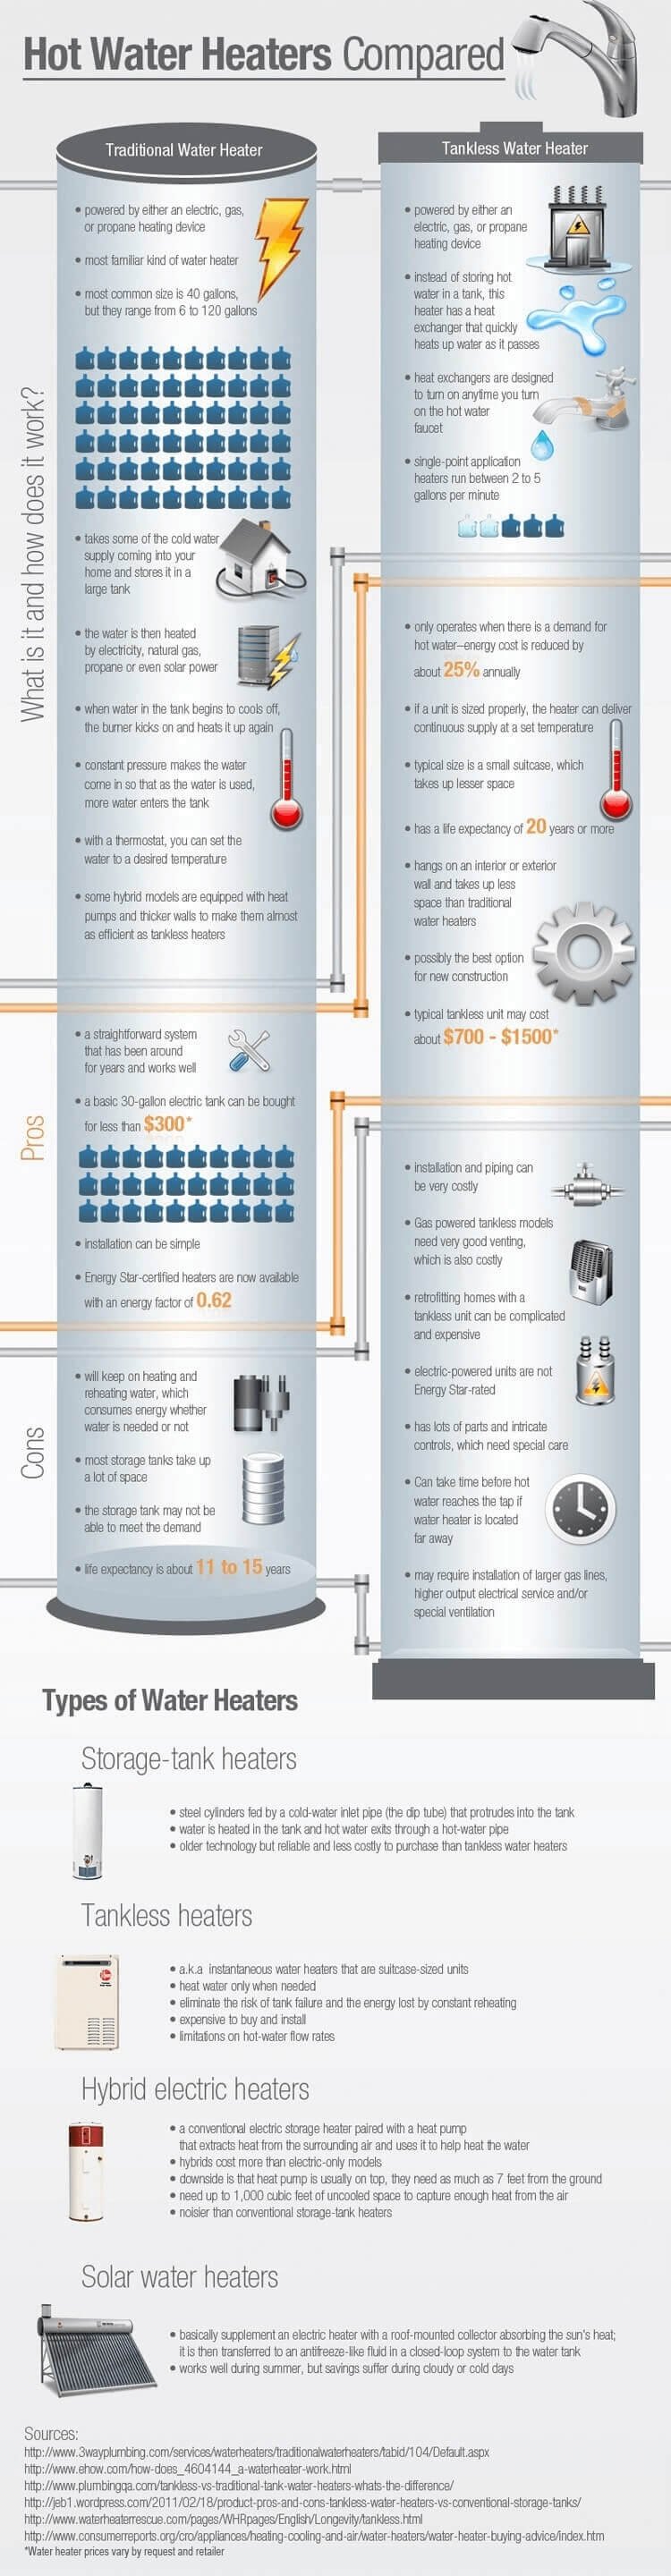 water heaters compared